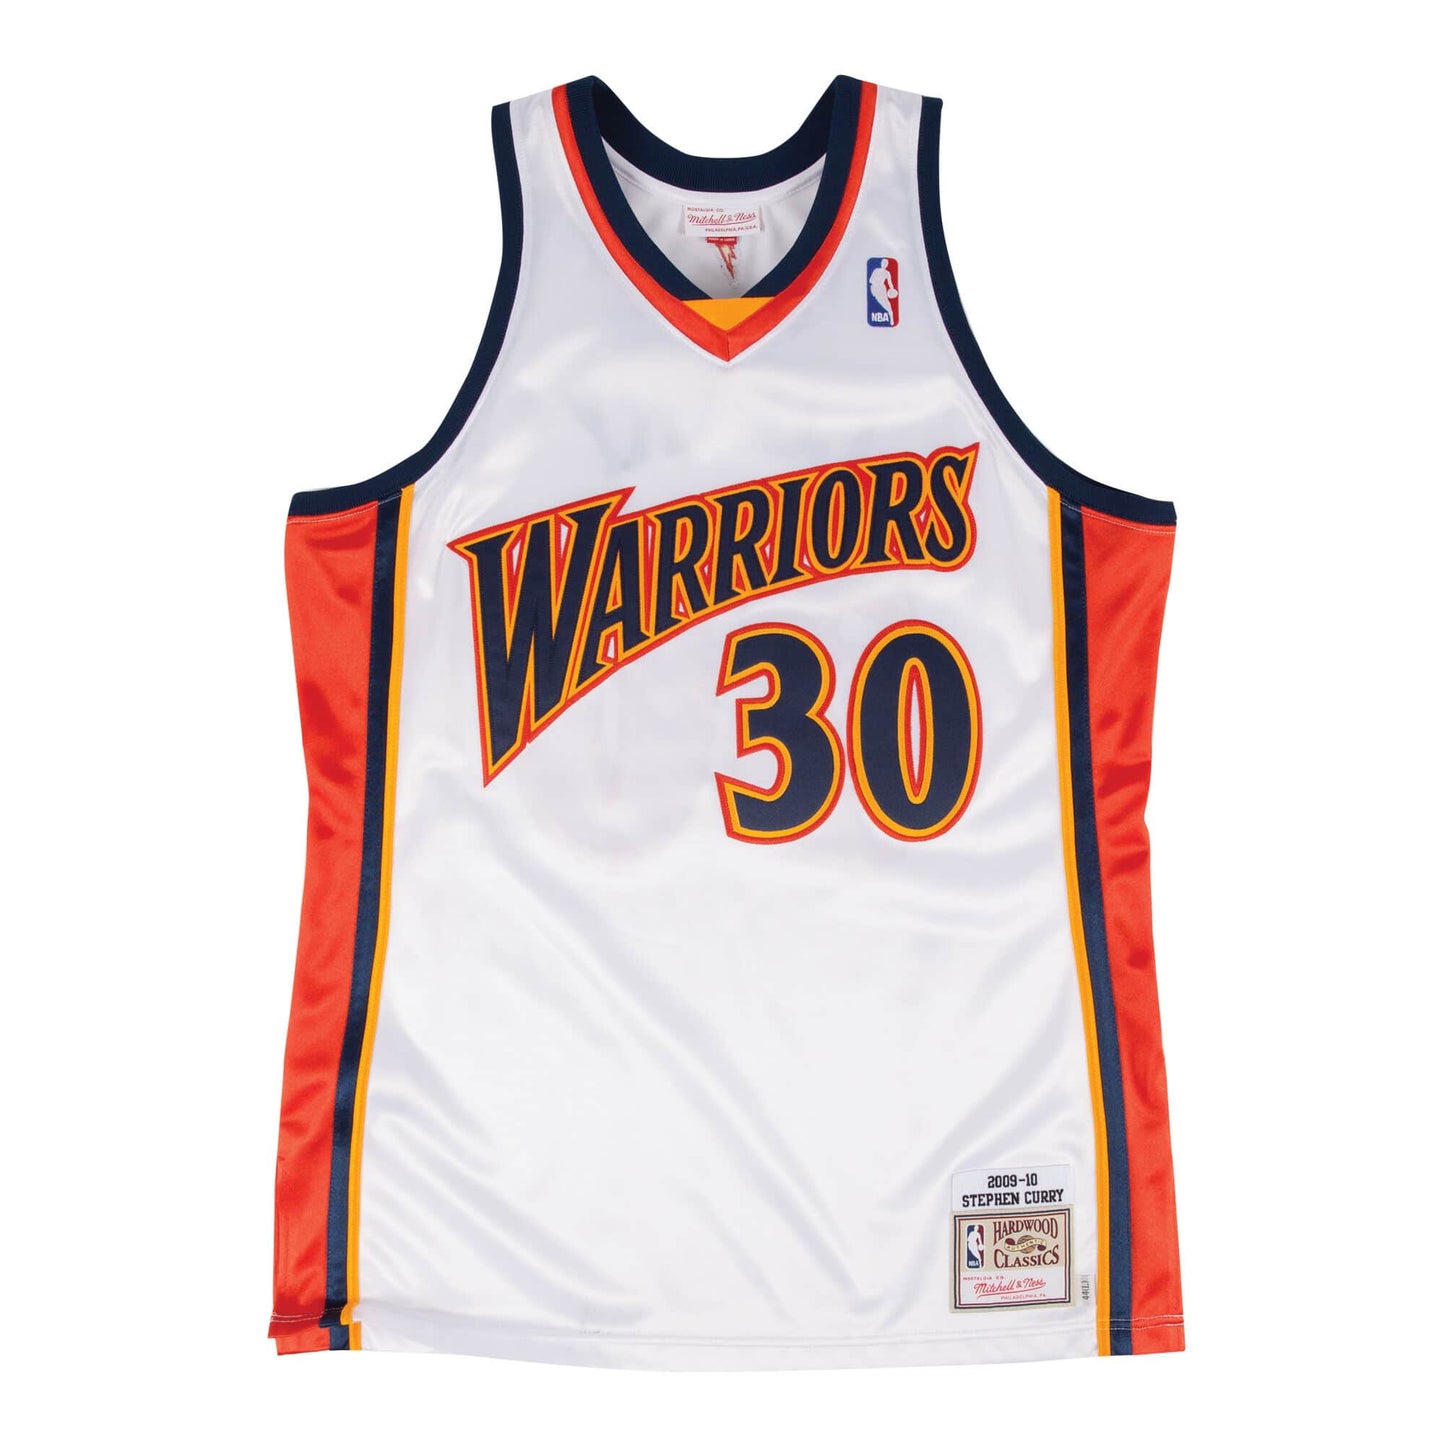 Authentic Jersey Golden State Warriors 2009-10 Stephen Curry